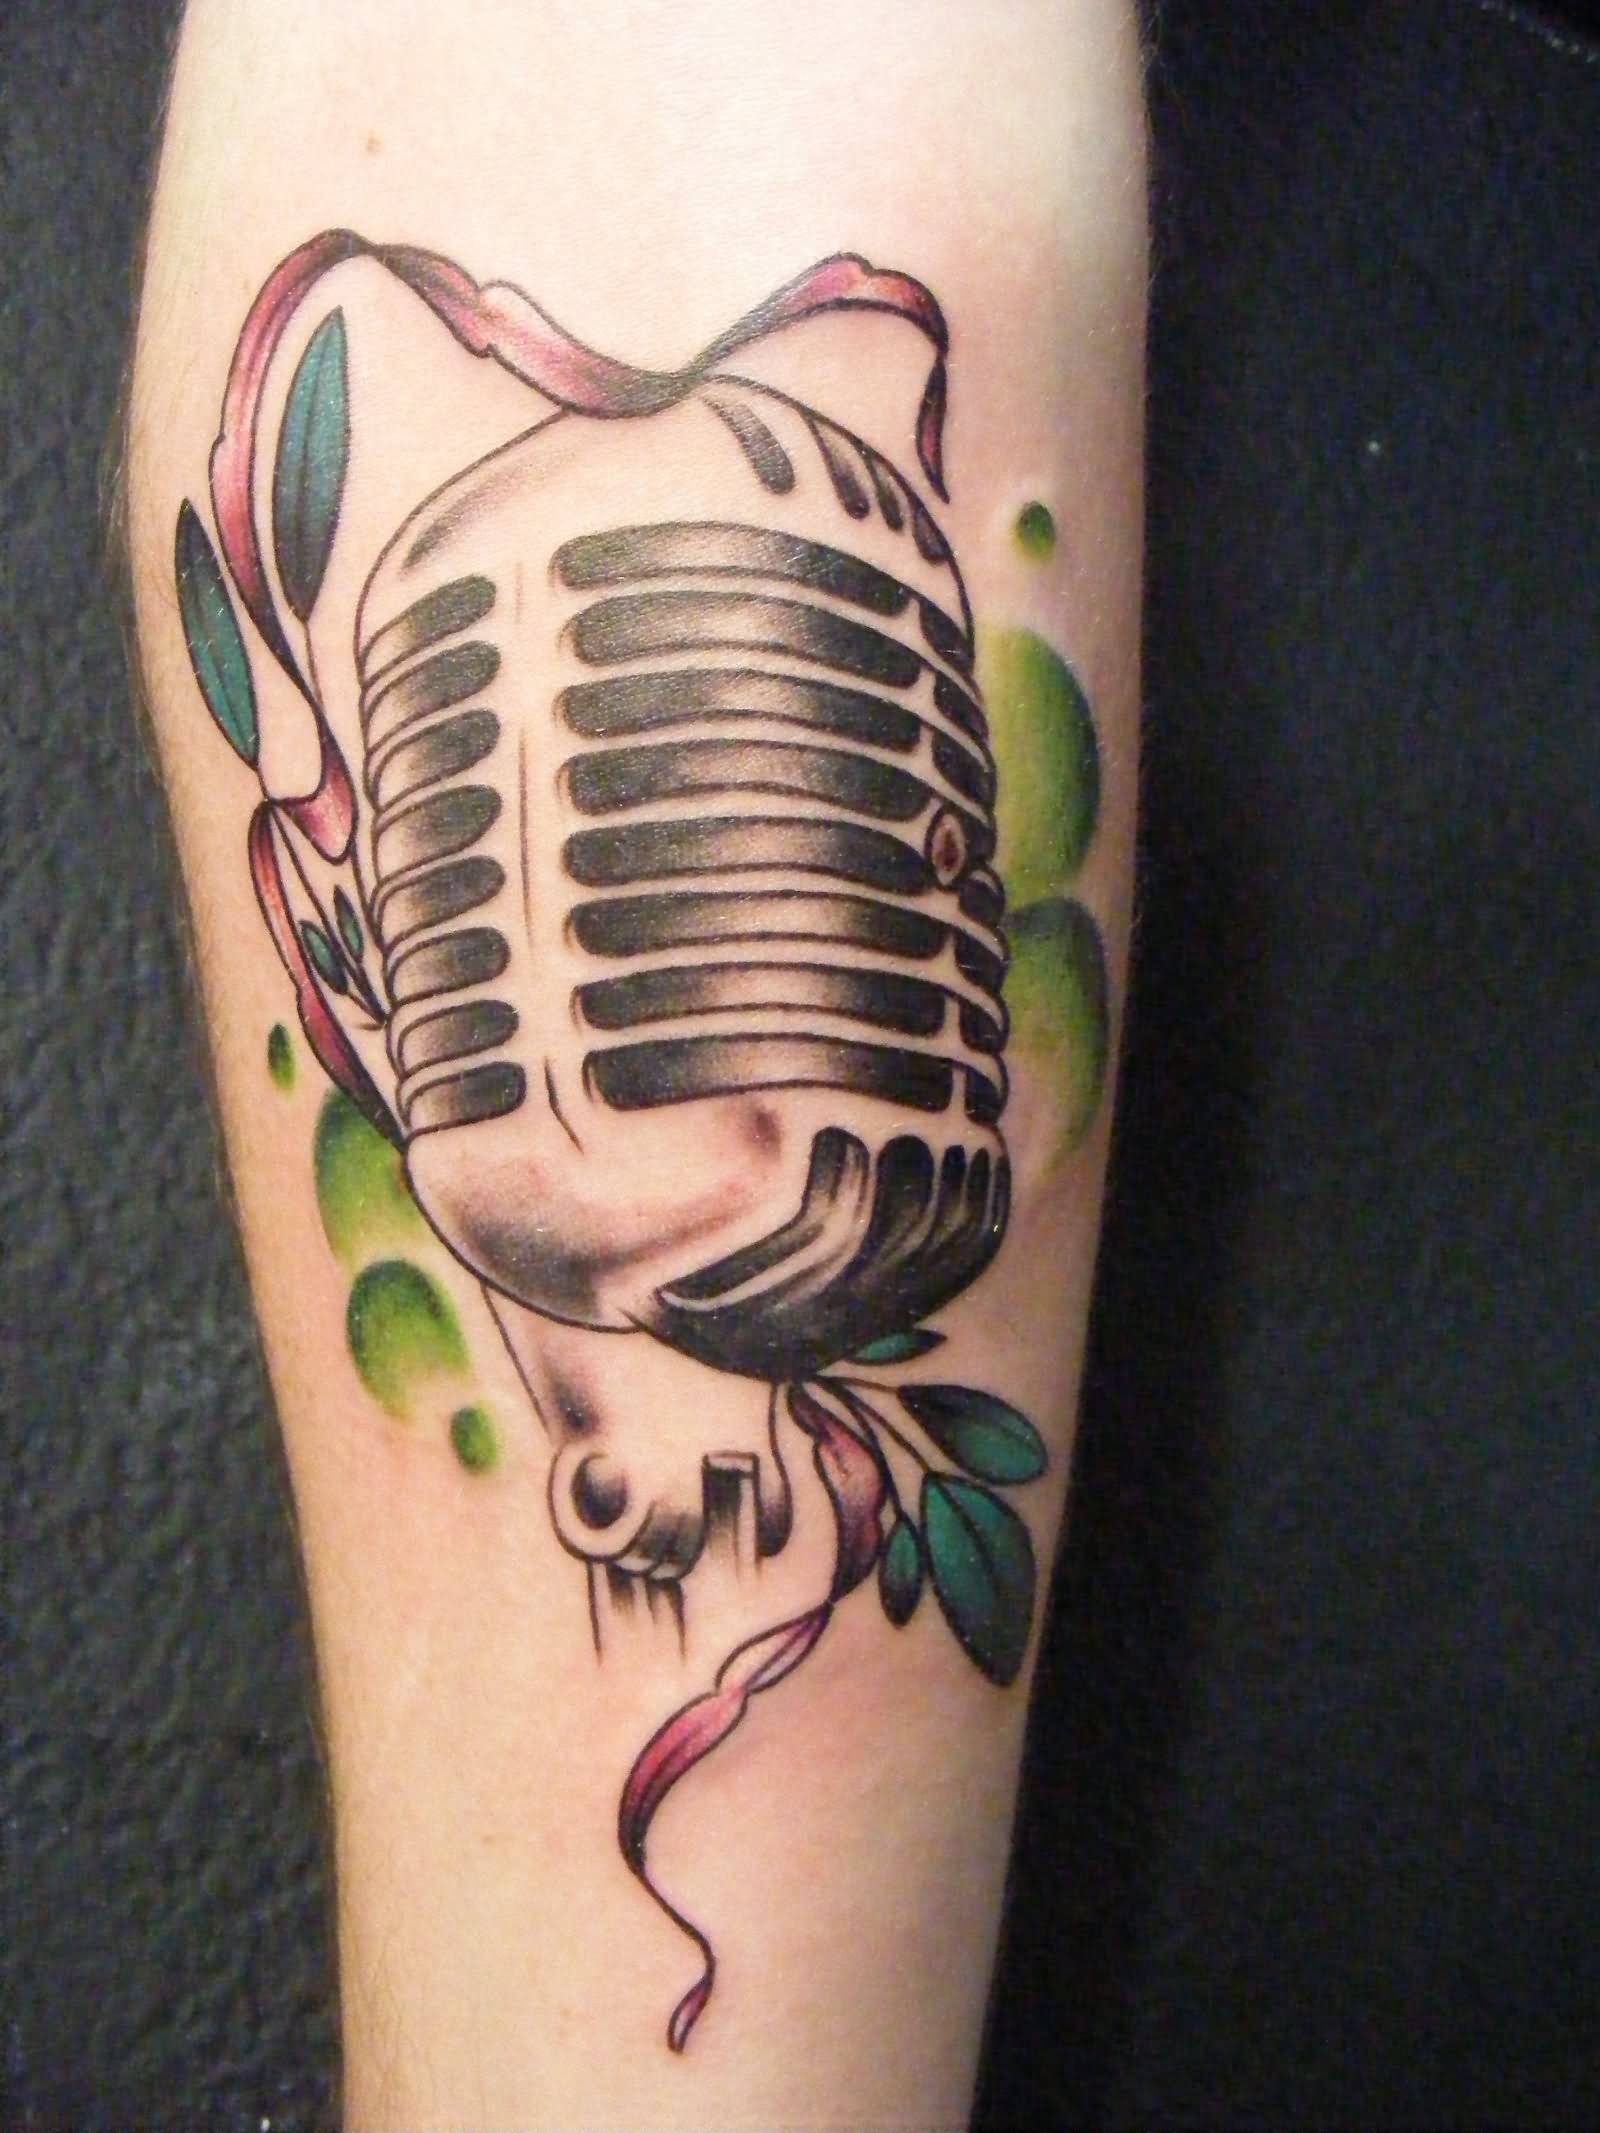 Red Ribbon And Microphone Tattoo On Leg.